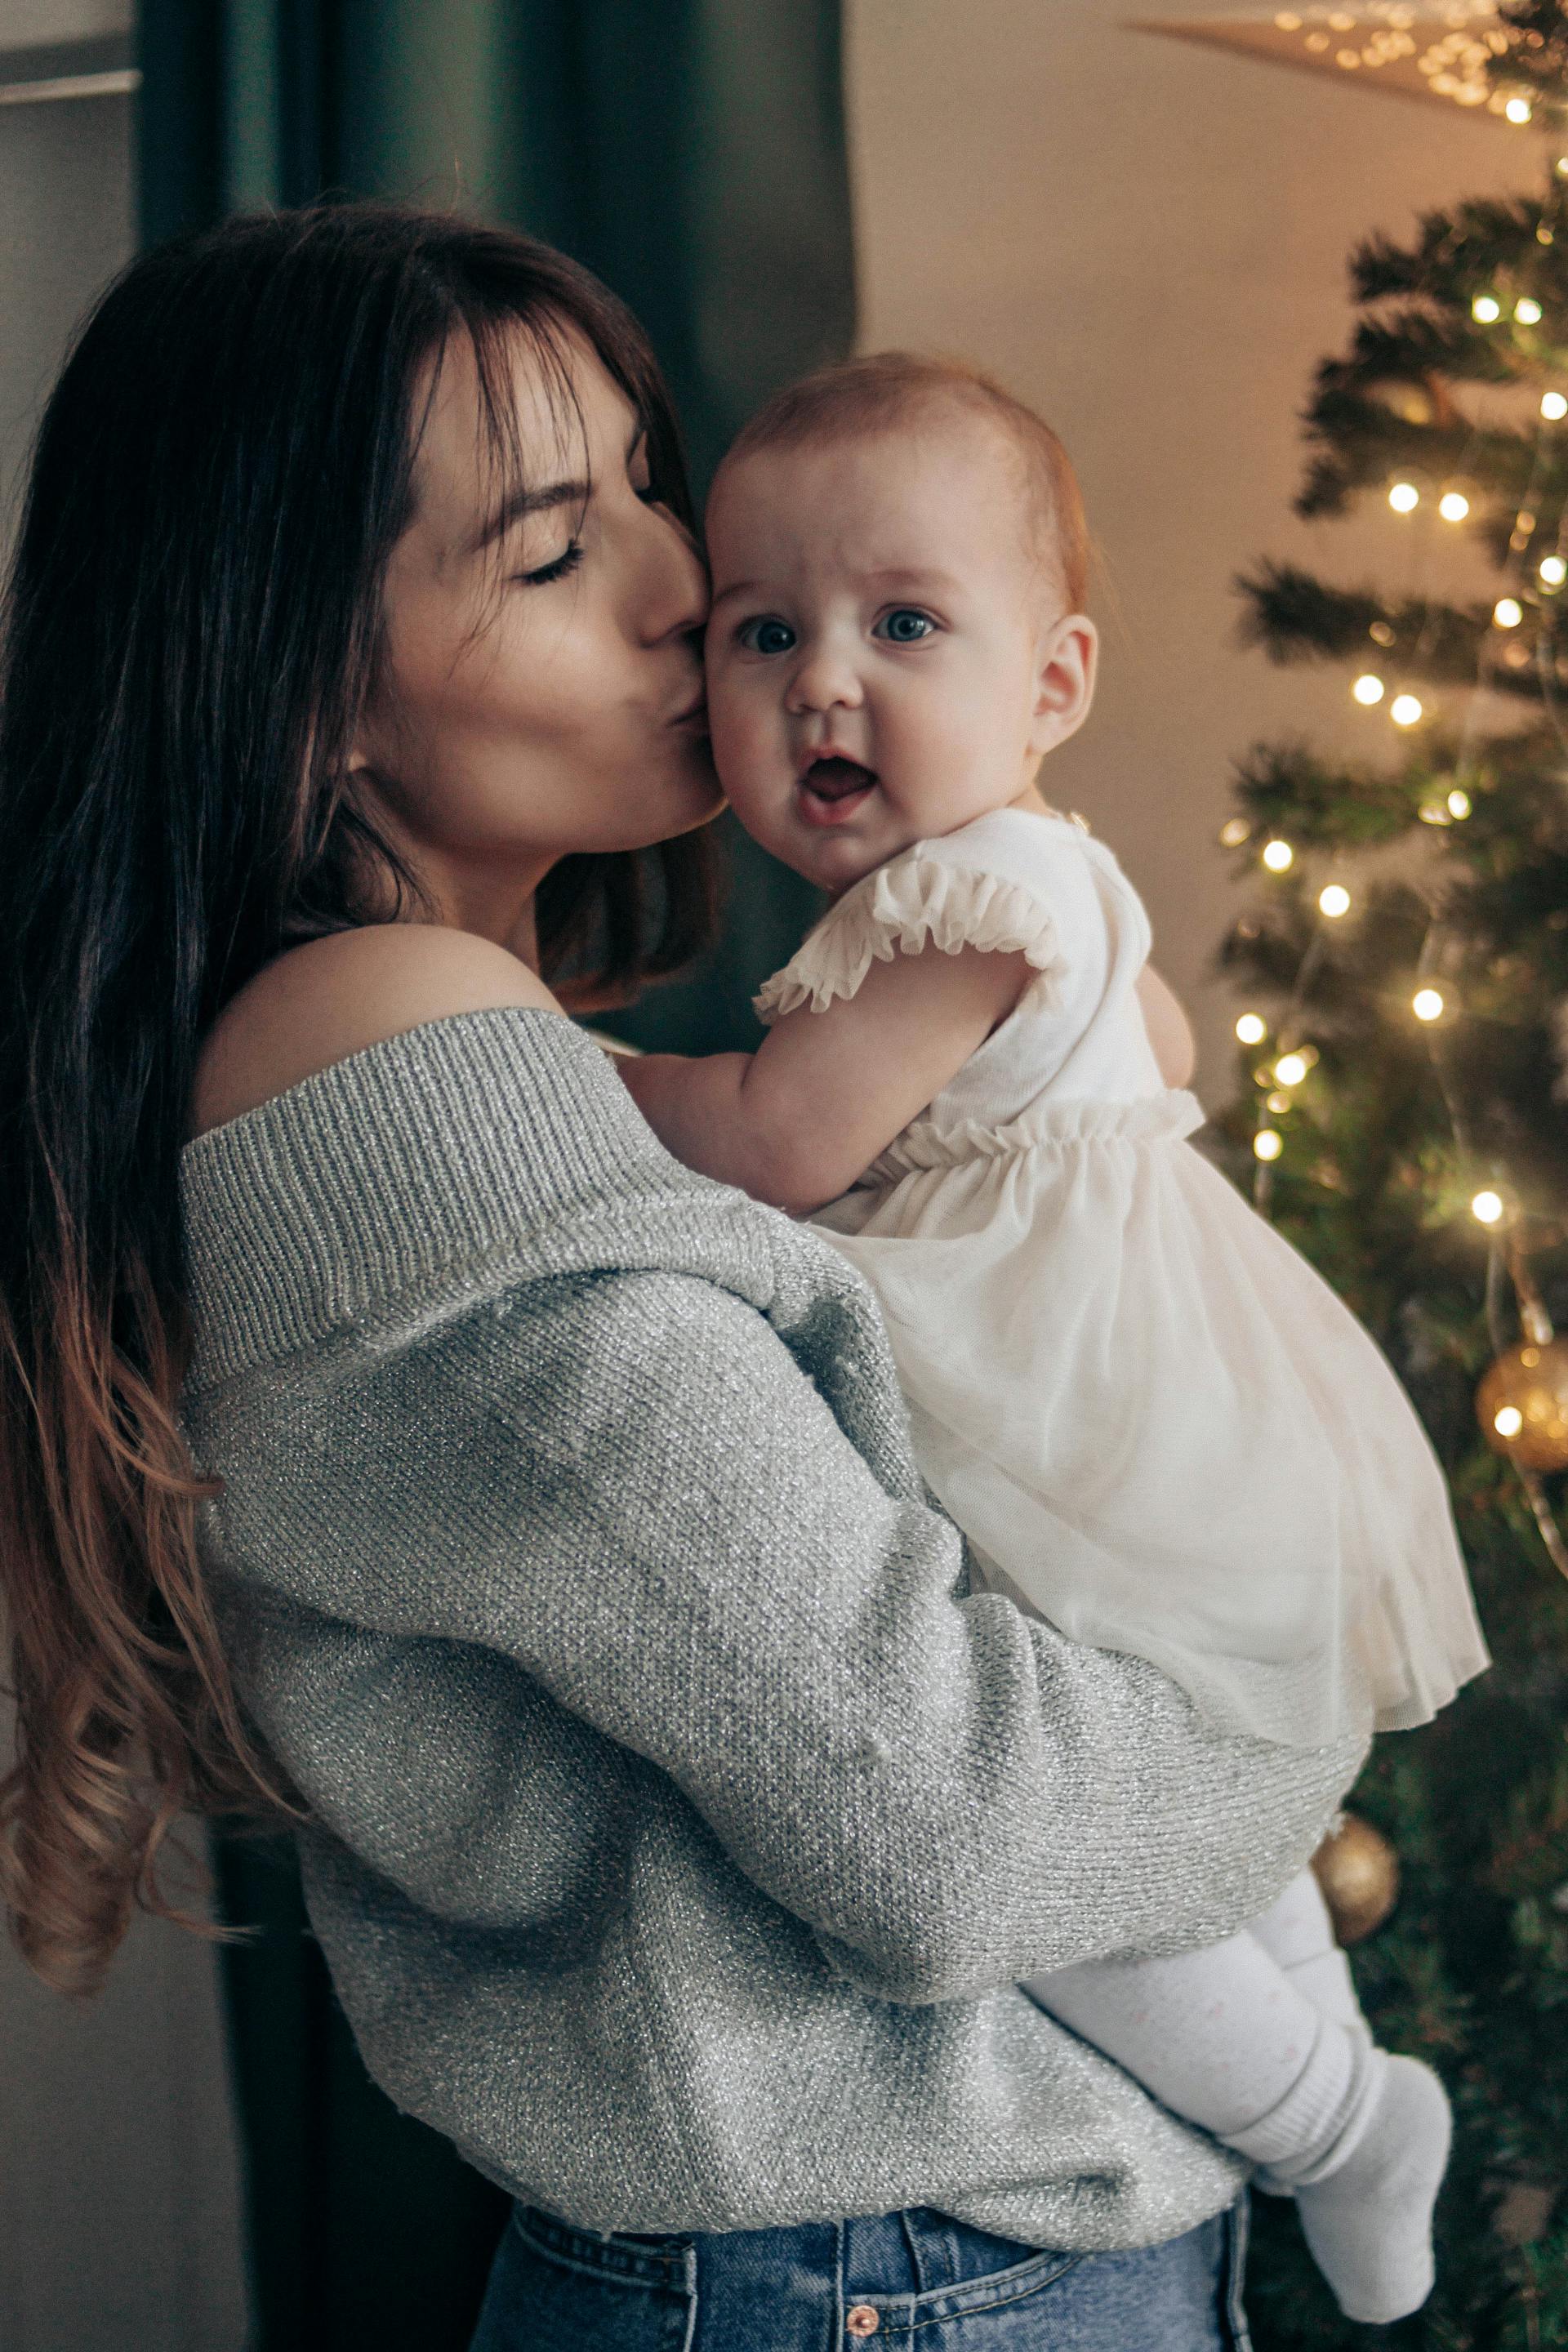 A mother kissing her little daughter | Source: Pexels